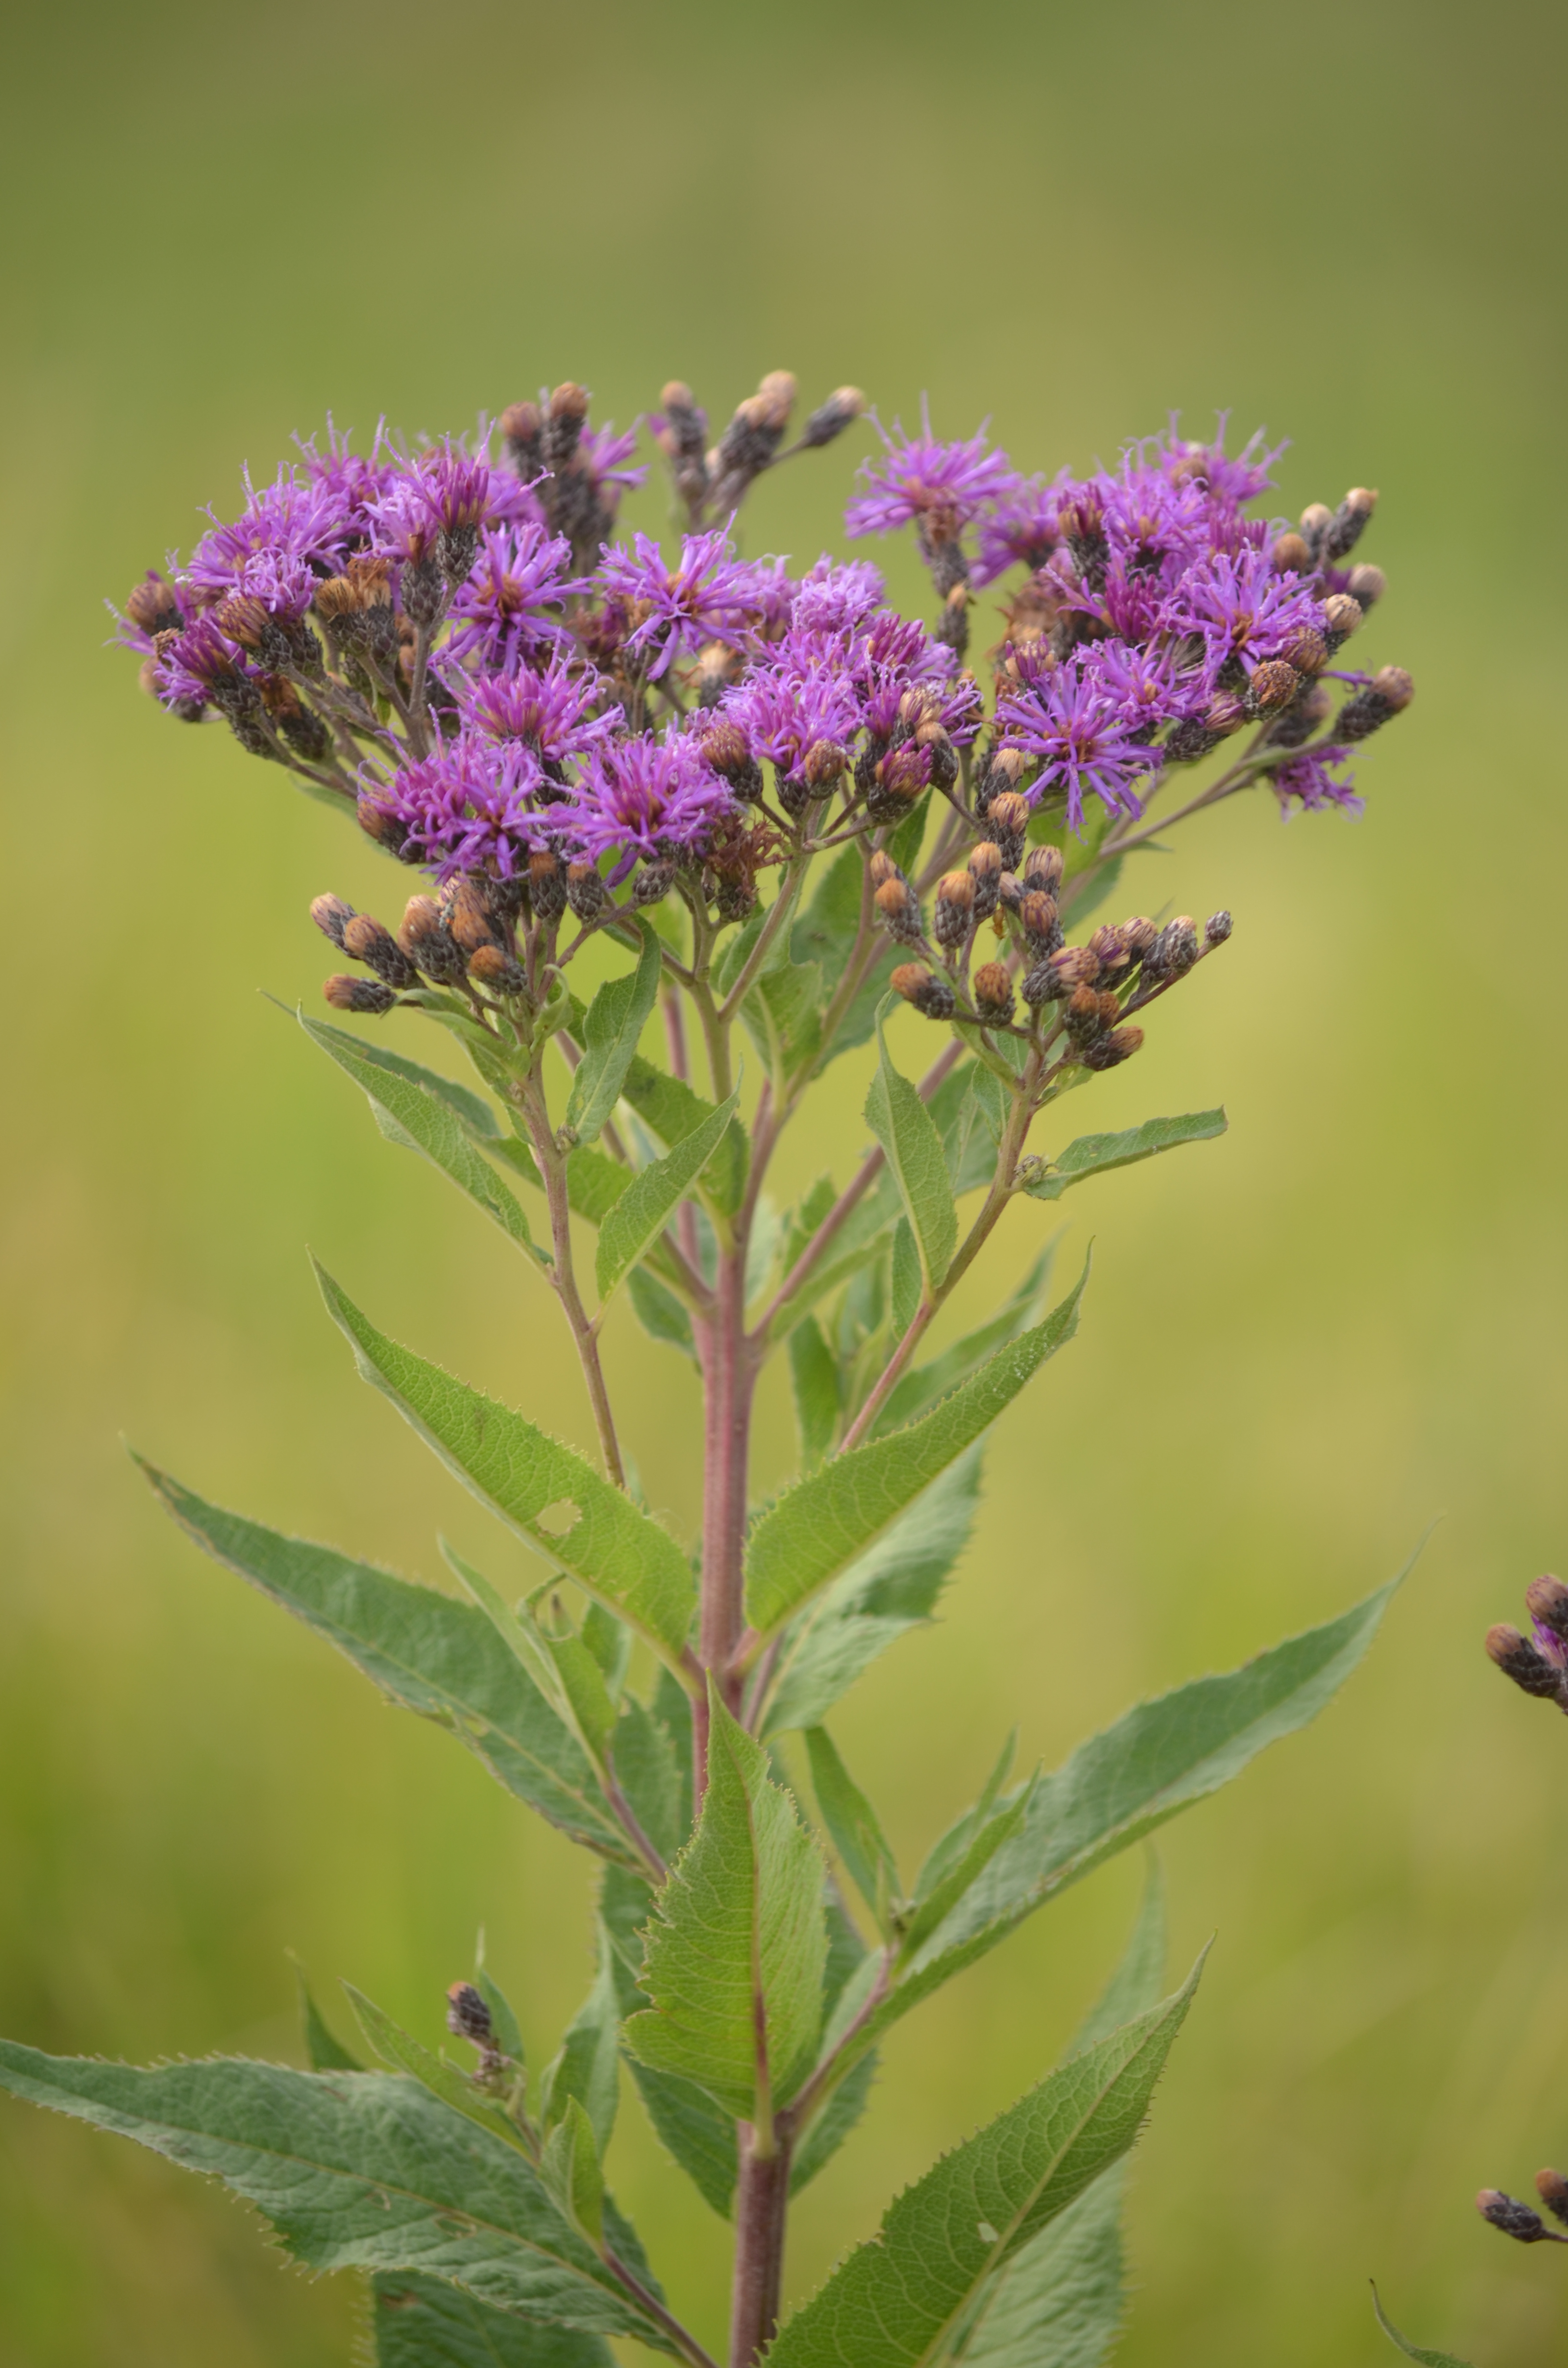 Ironweed can limit forage production and pasture utilization